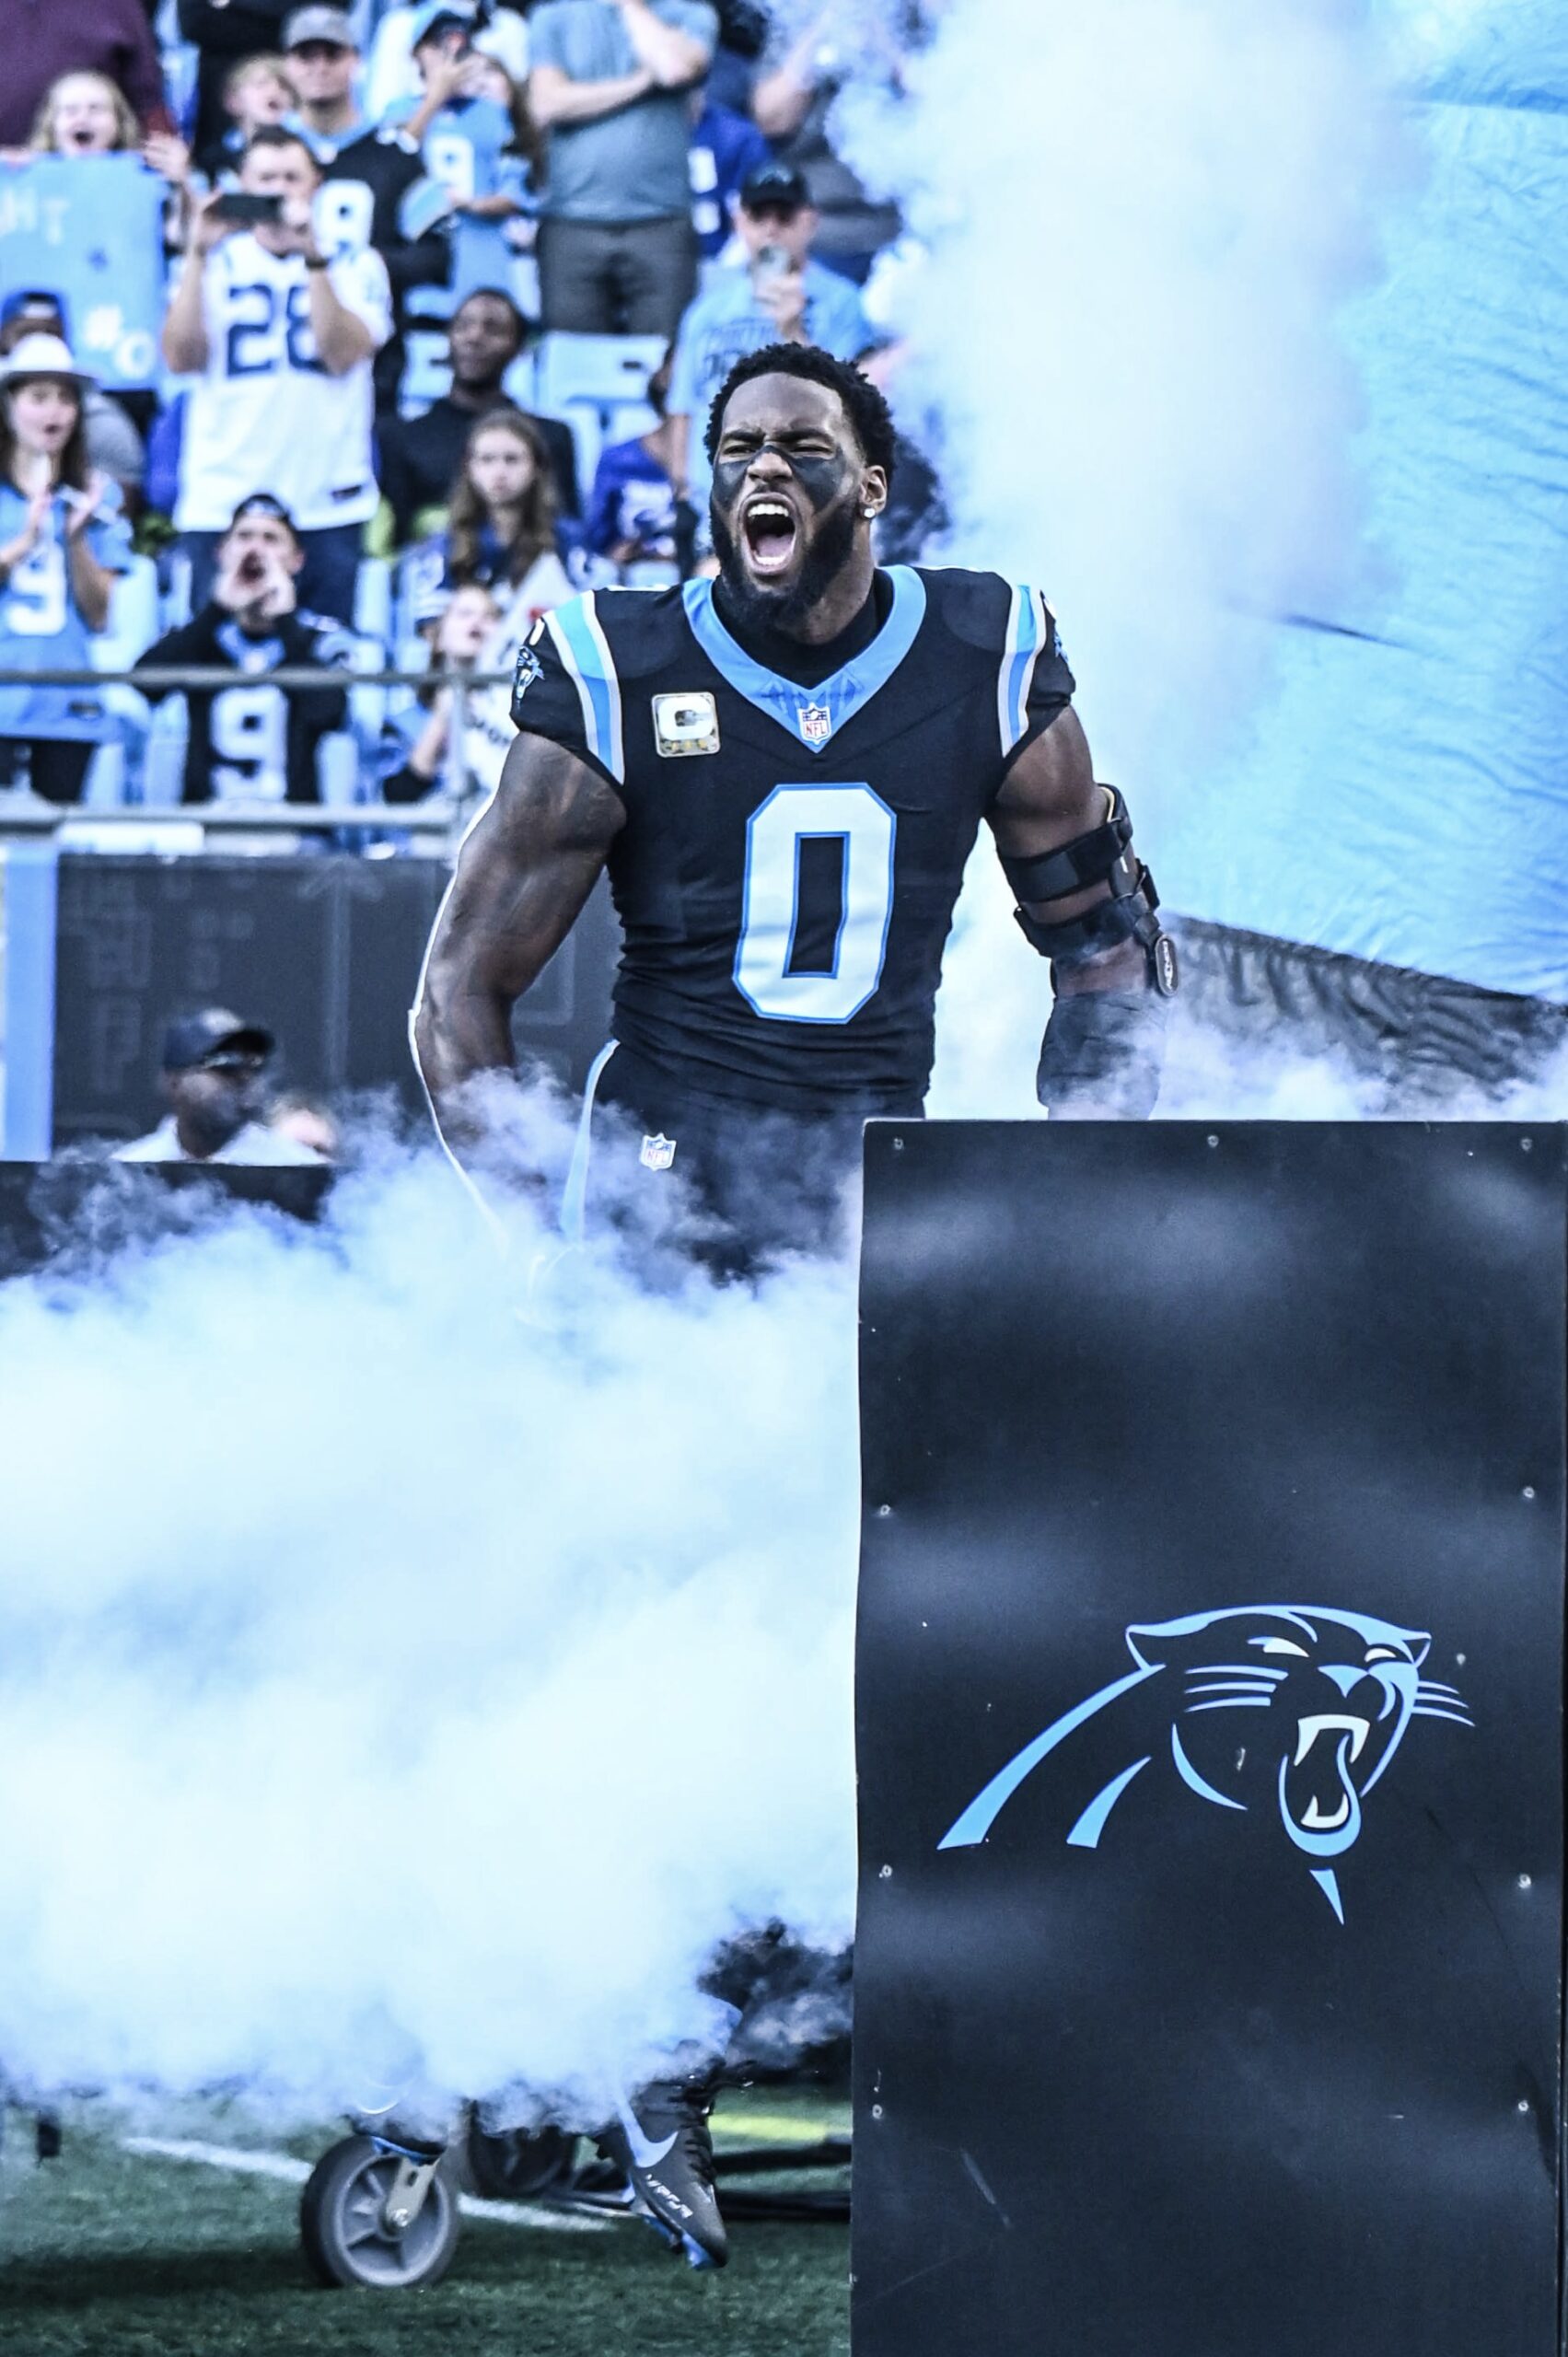 Panthers vs Colts Photo Gallery